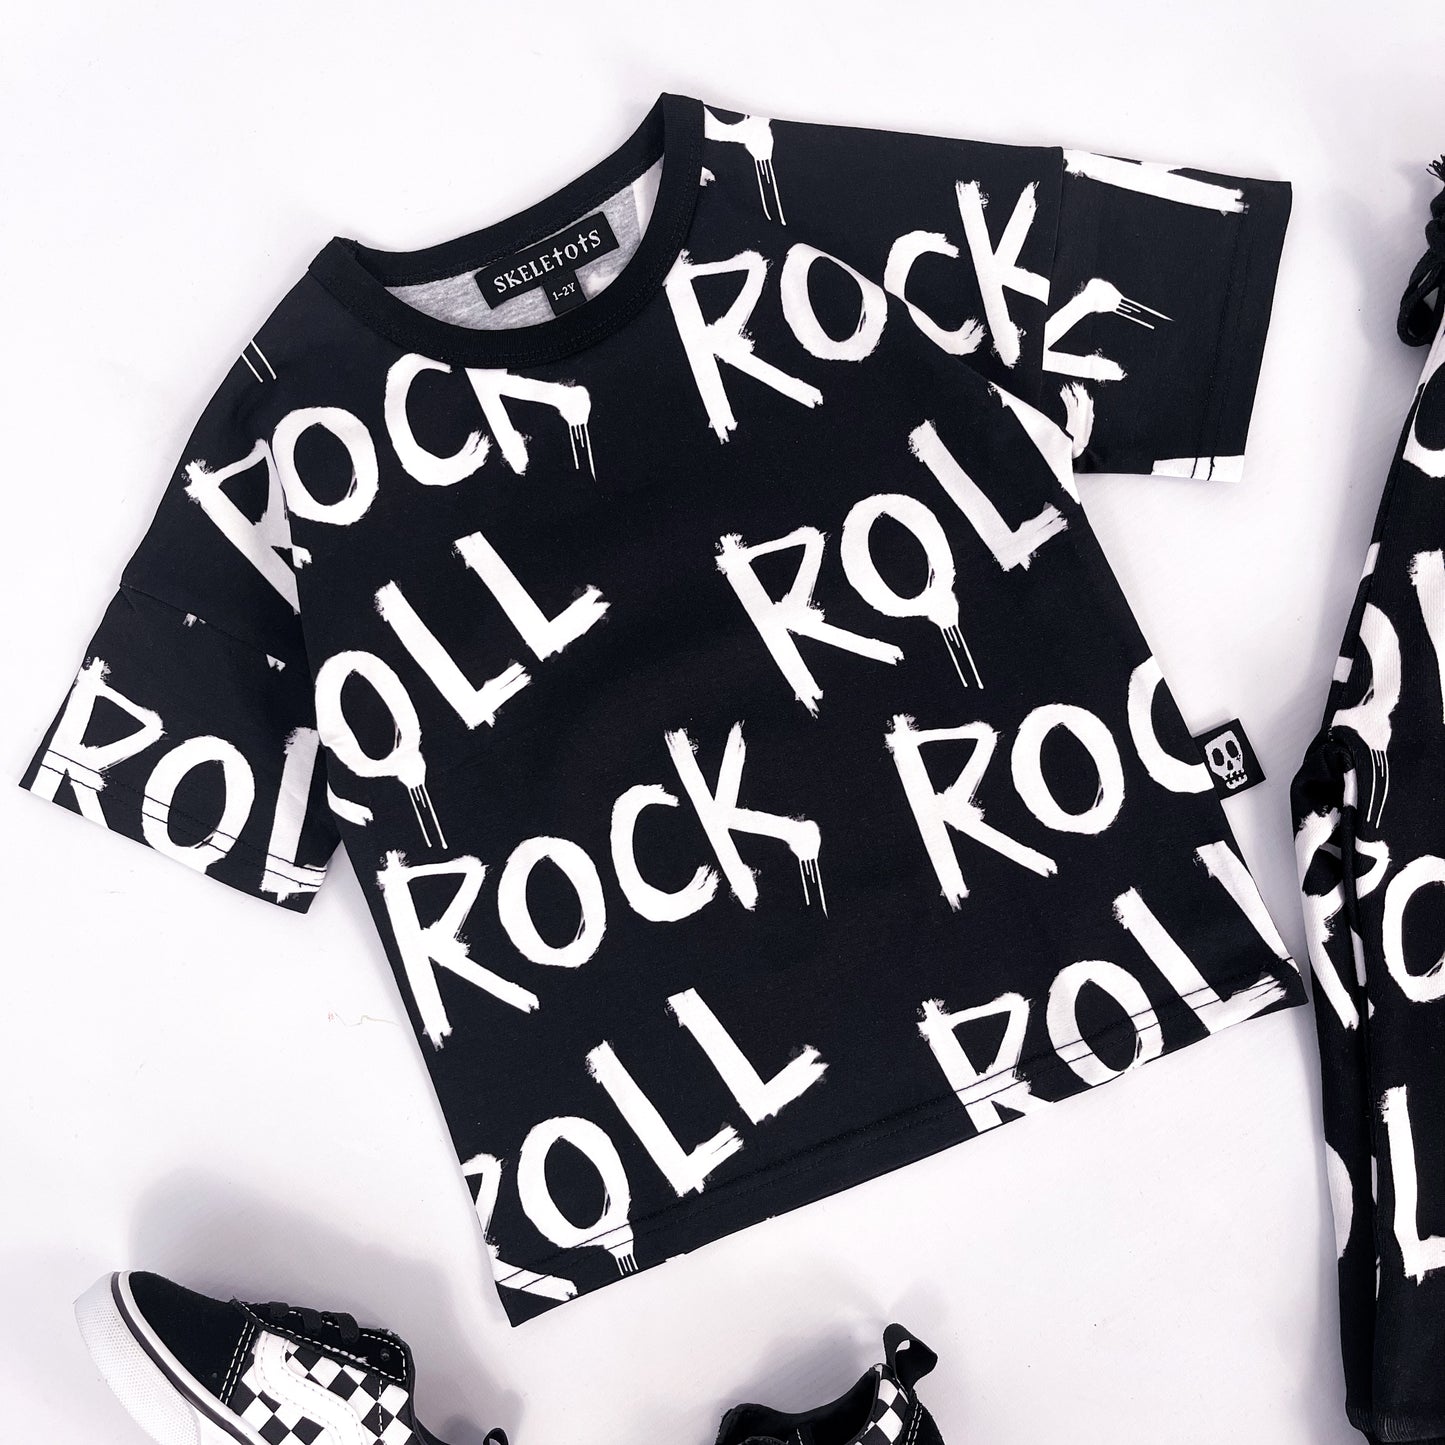 Kids black tee shirt with words "rock" and "roll" printed on it repeatedly